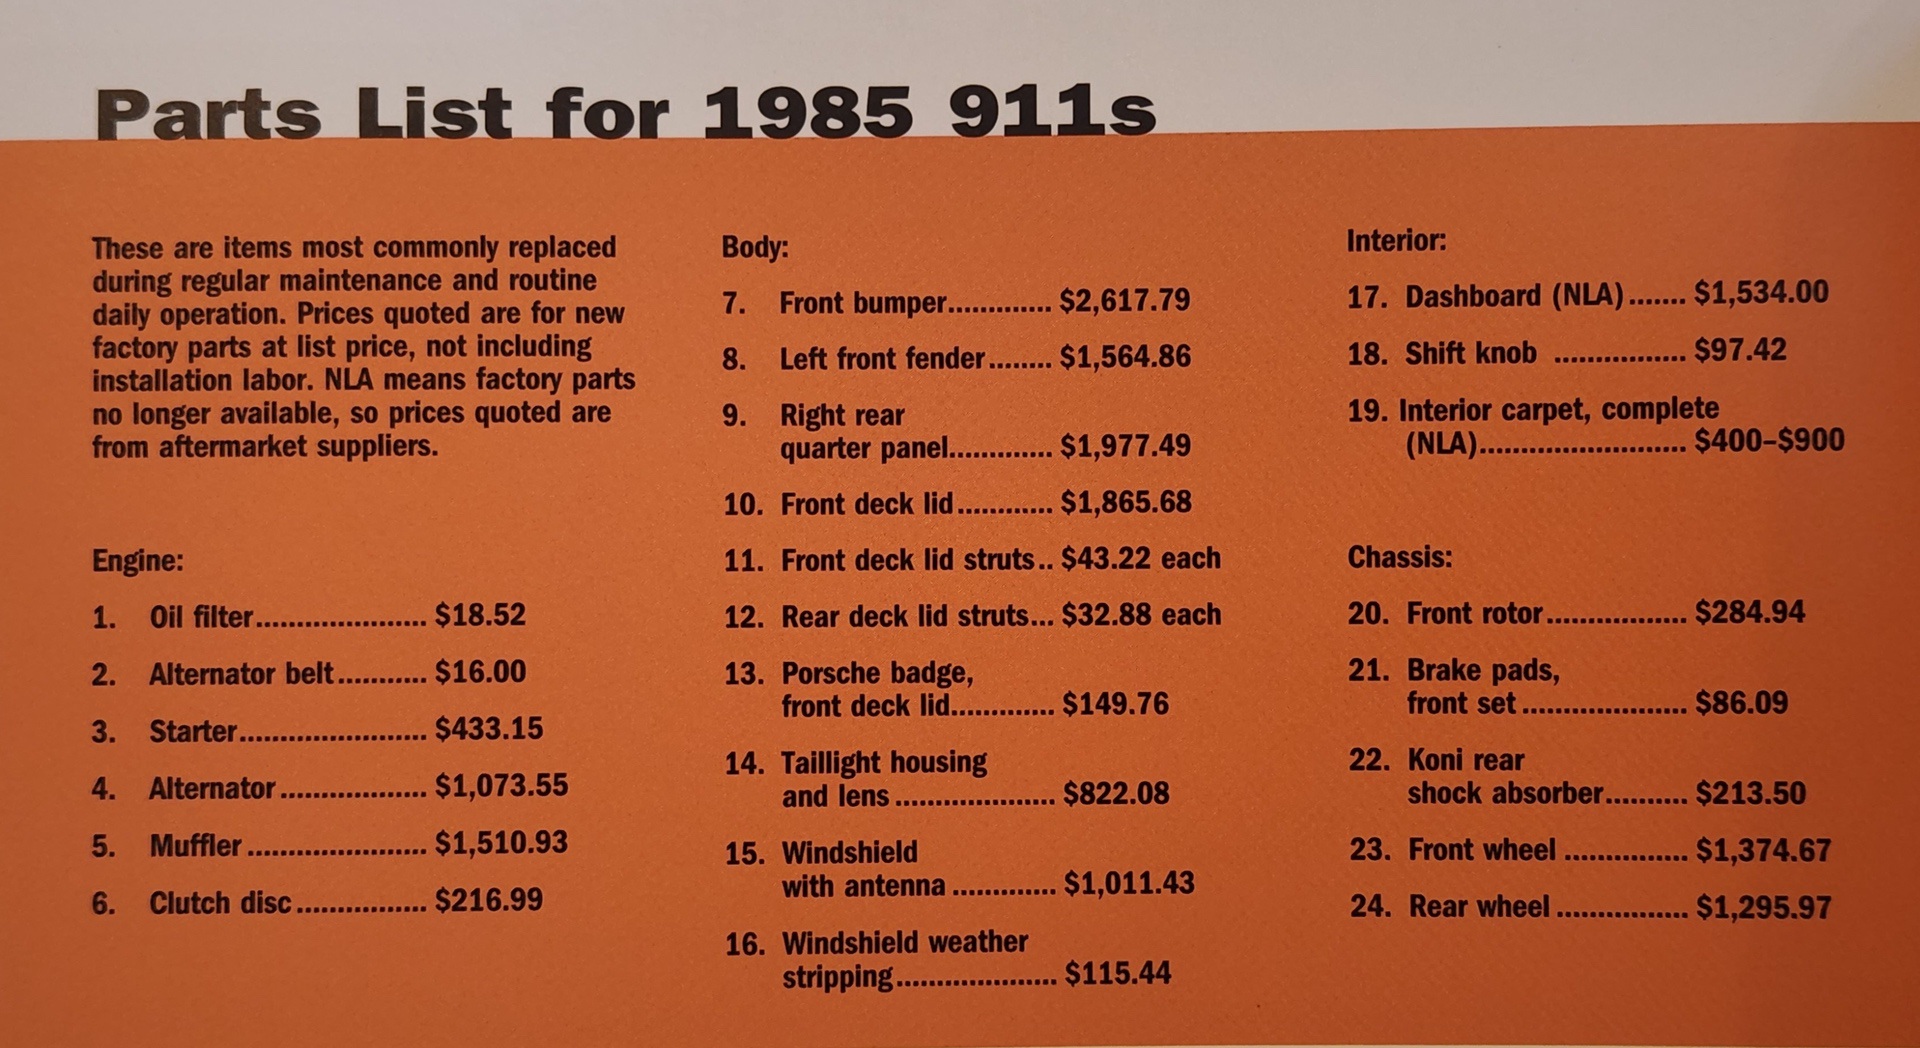 Parts list from Classic Porsche 911 Buyer’s guide by Randy Leffingwell